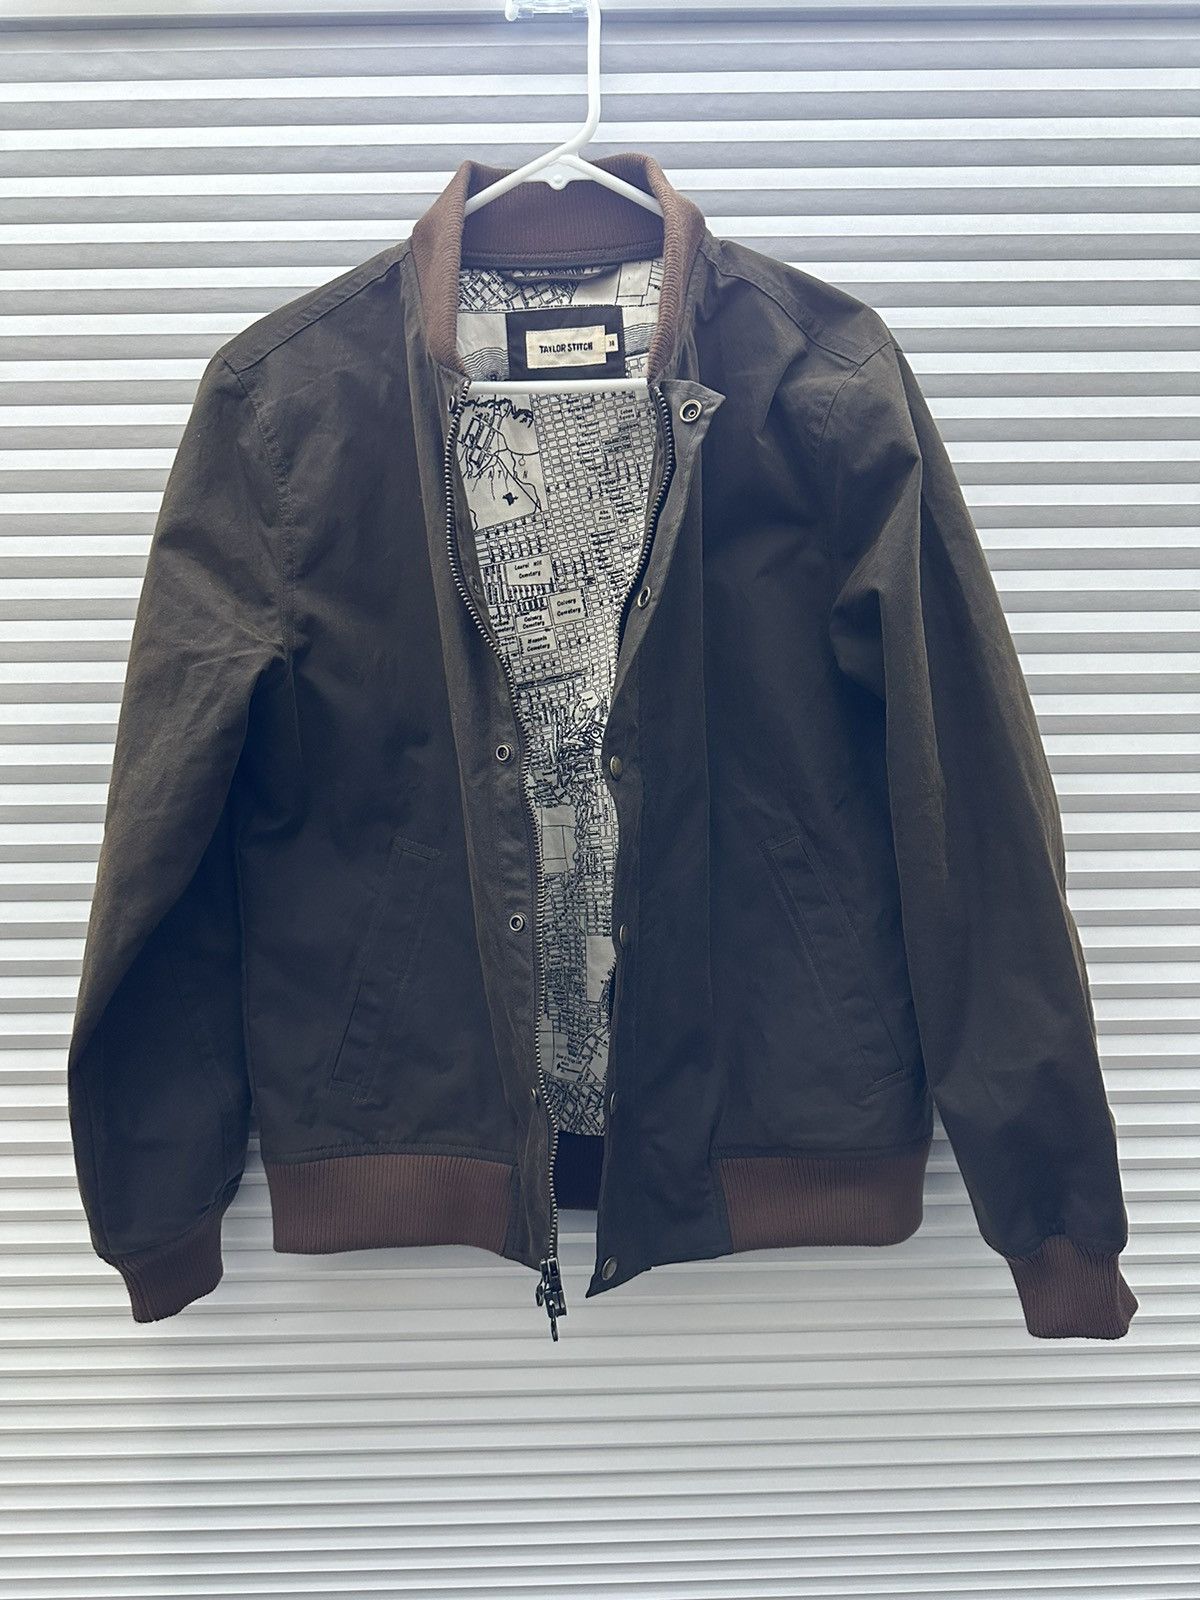 Taylor Stitch The Bomber Jacket in Bark EverWax | Grailed